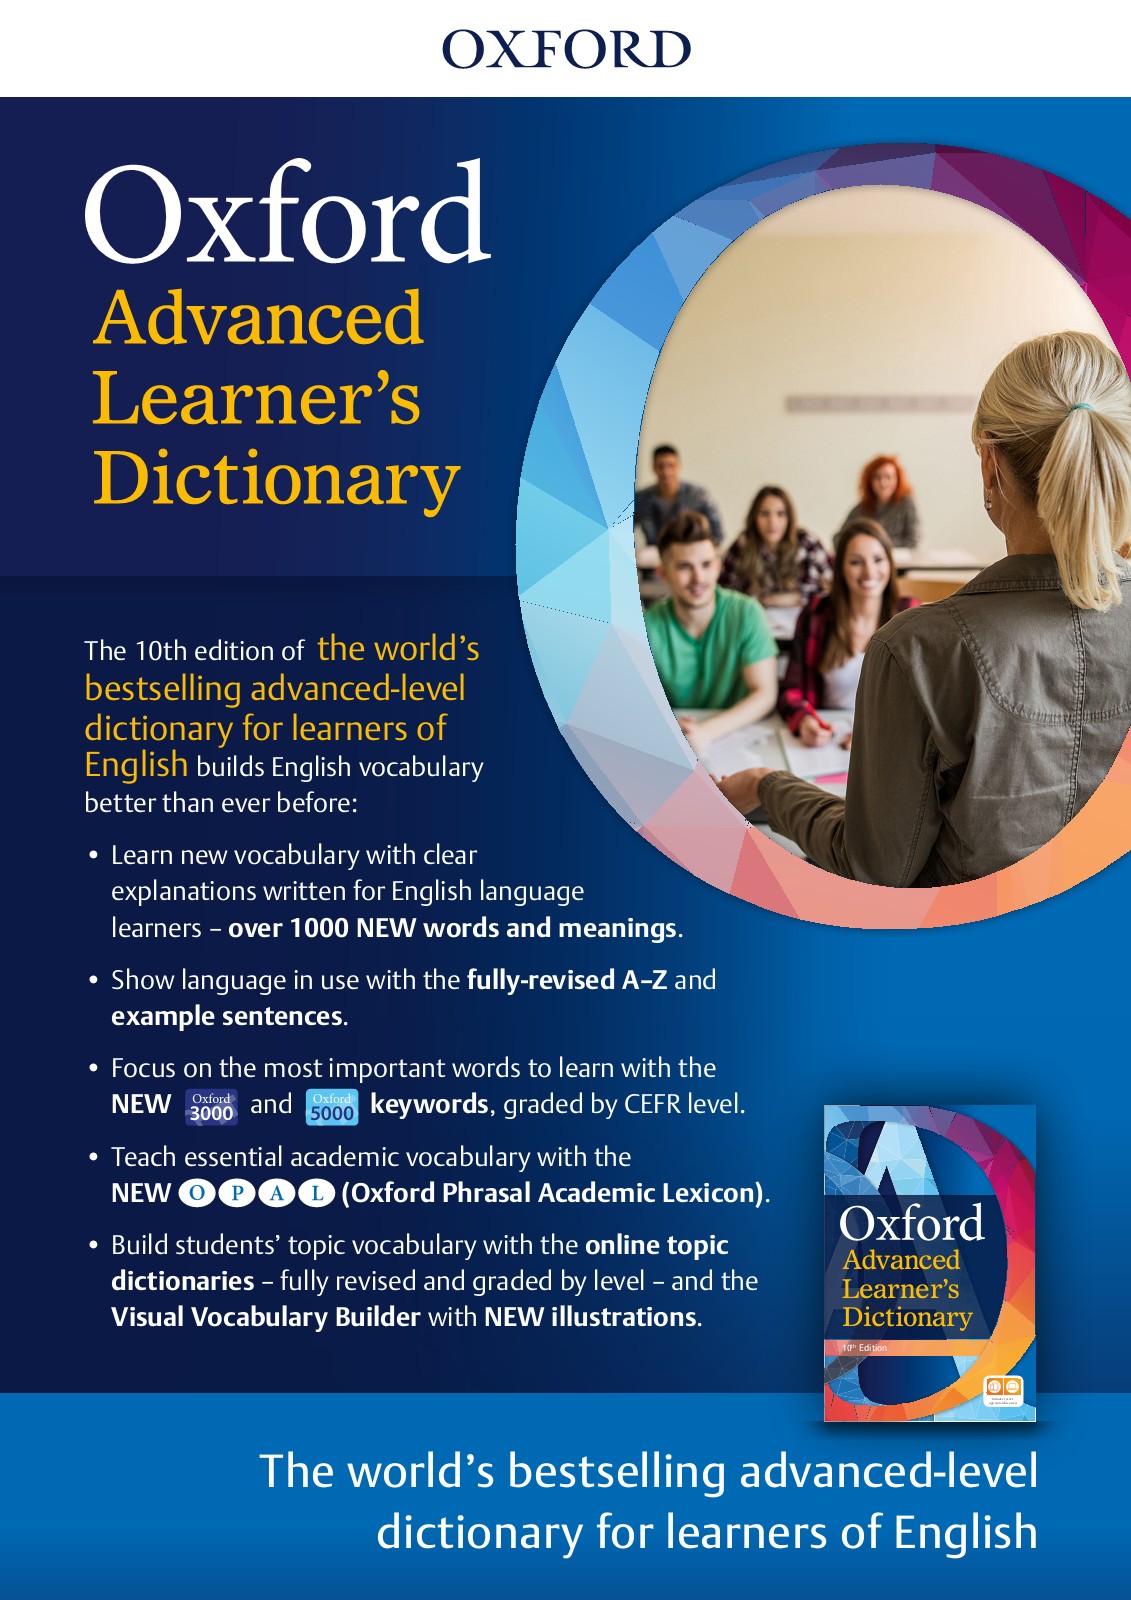 presentation meaning oxford learner's dictionary